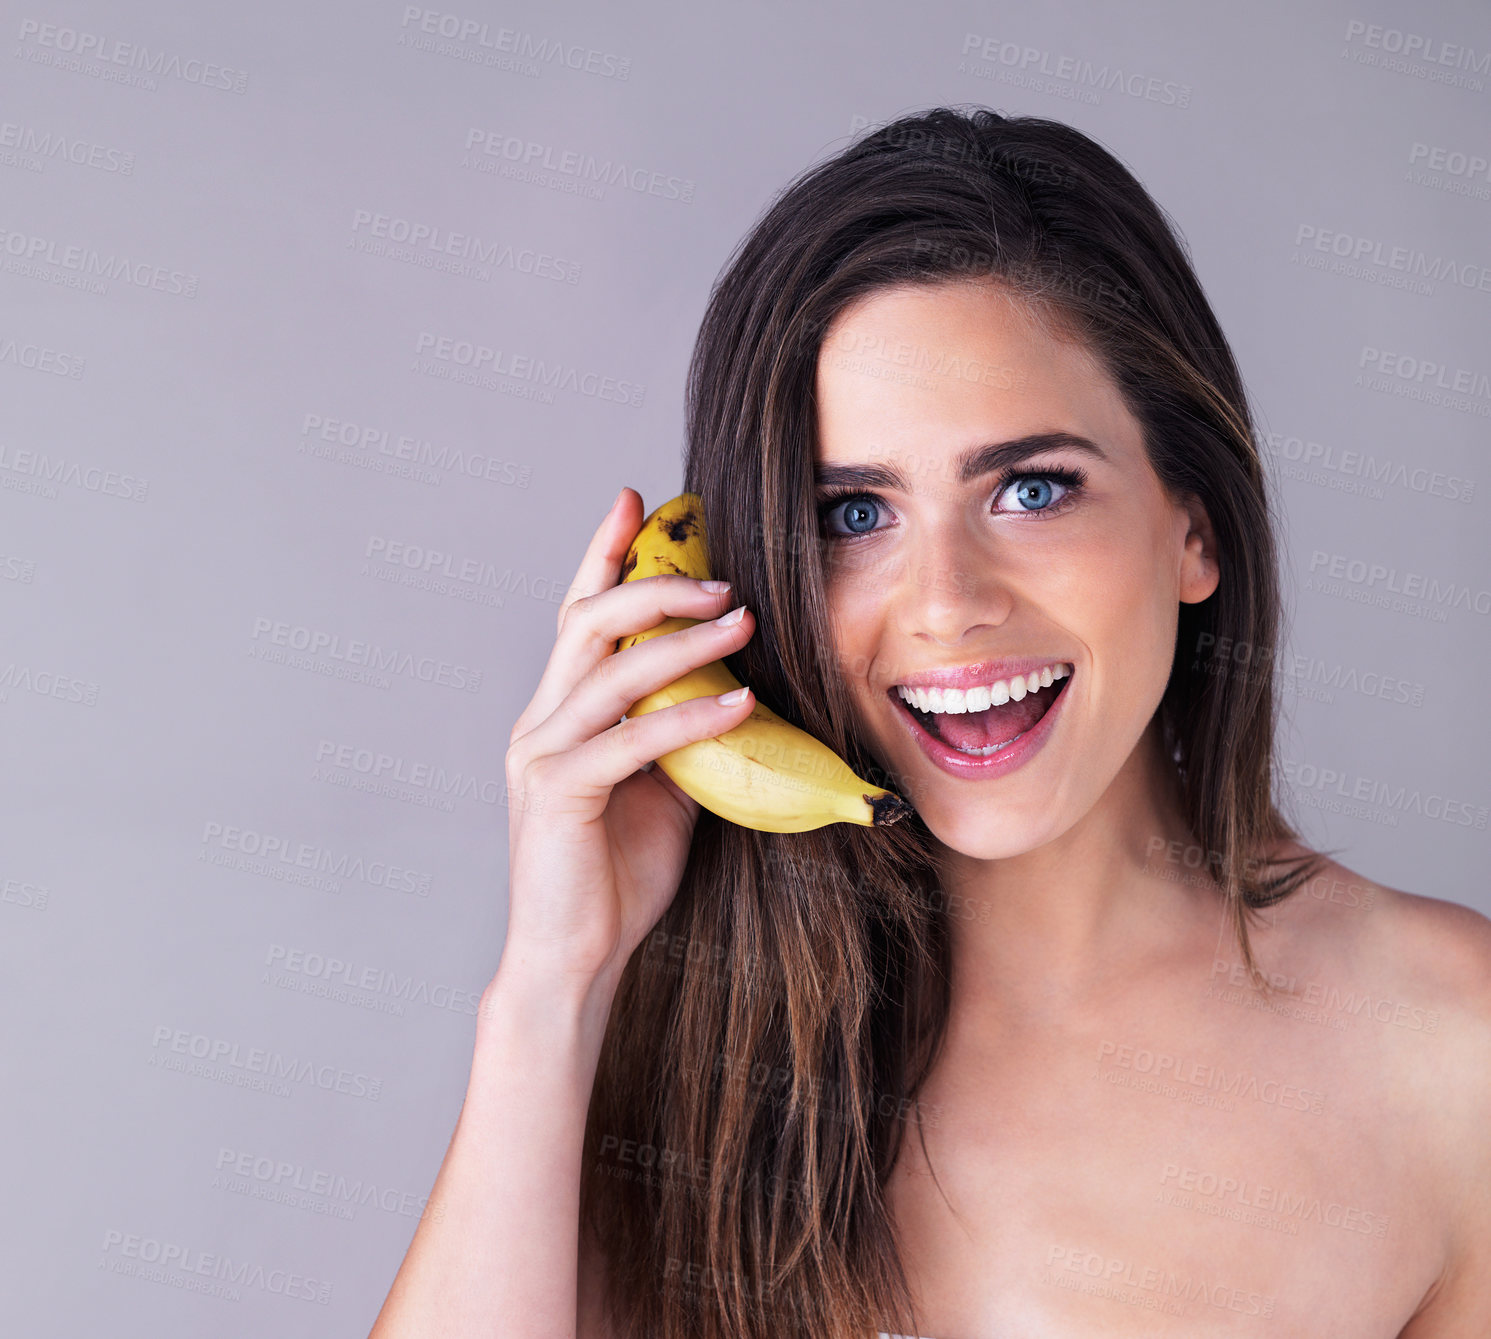 Buy stock photo Studio portrait of an attractive young woman pretending to use a banana as a phone against a purple background